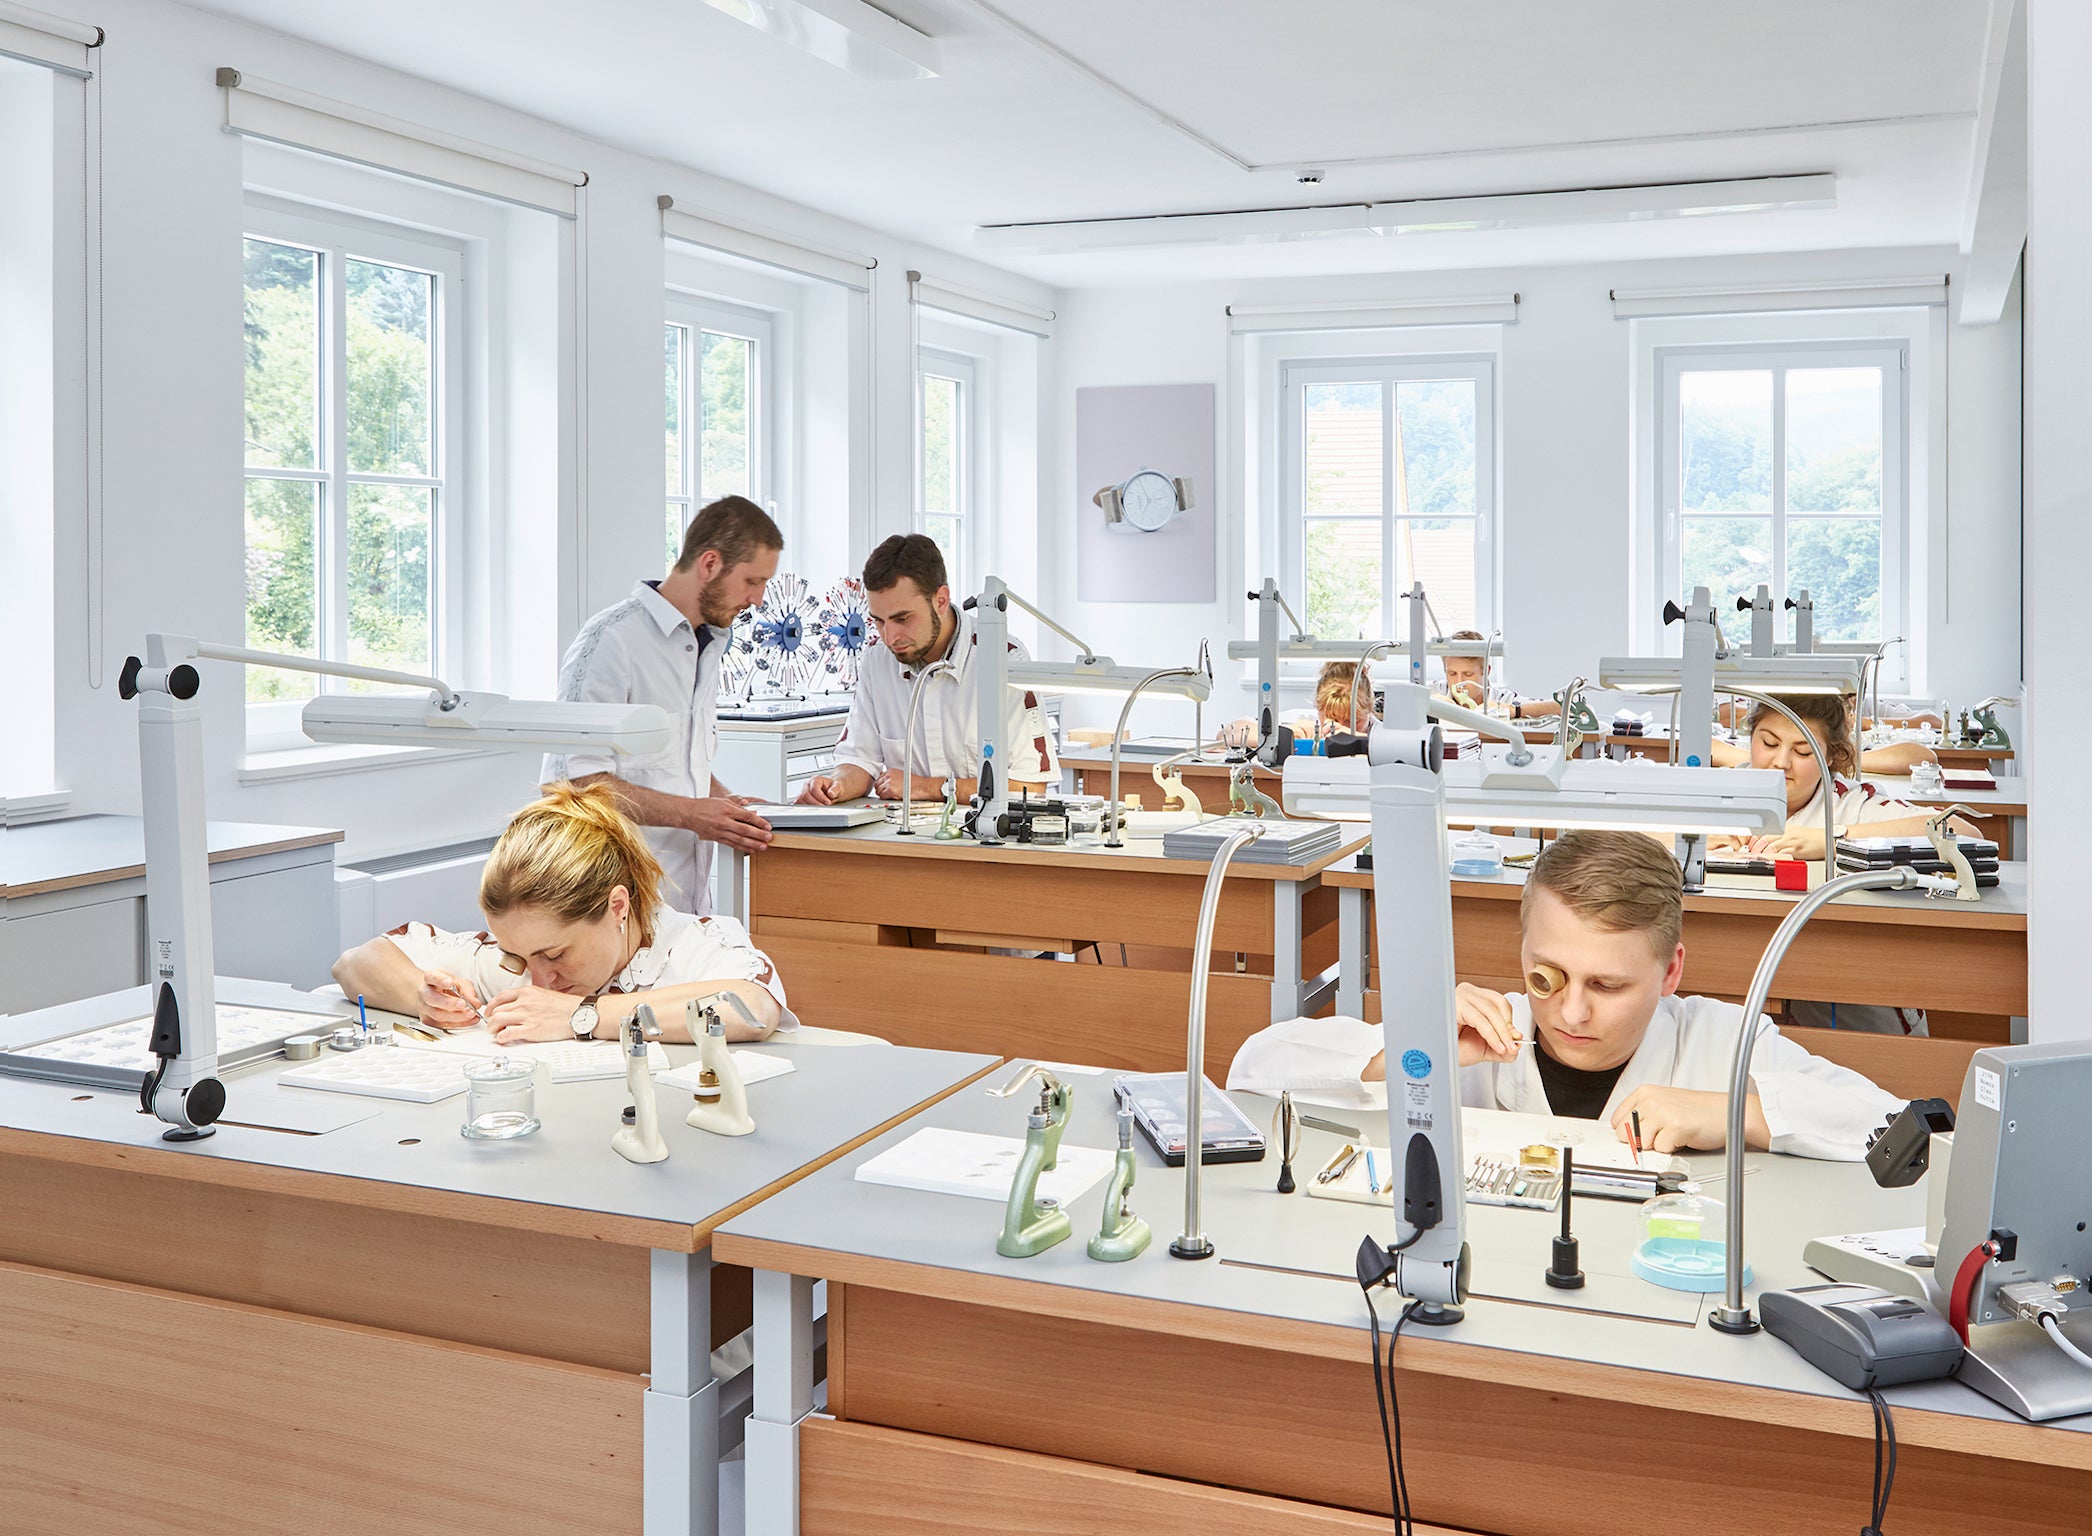 Nomos employs 300 people from 20 nations